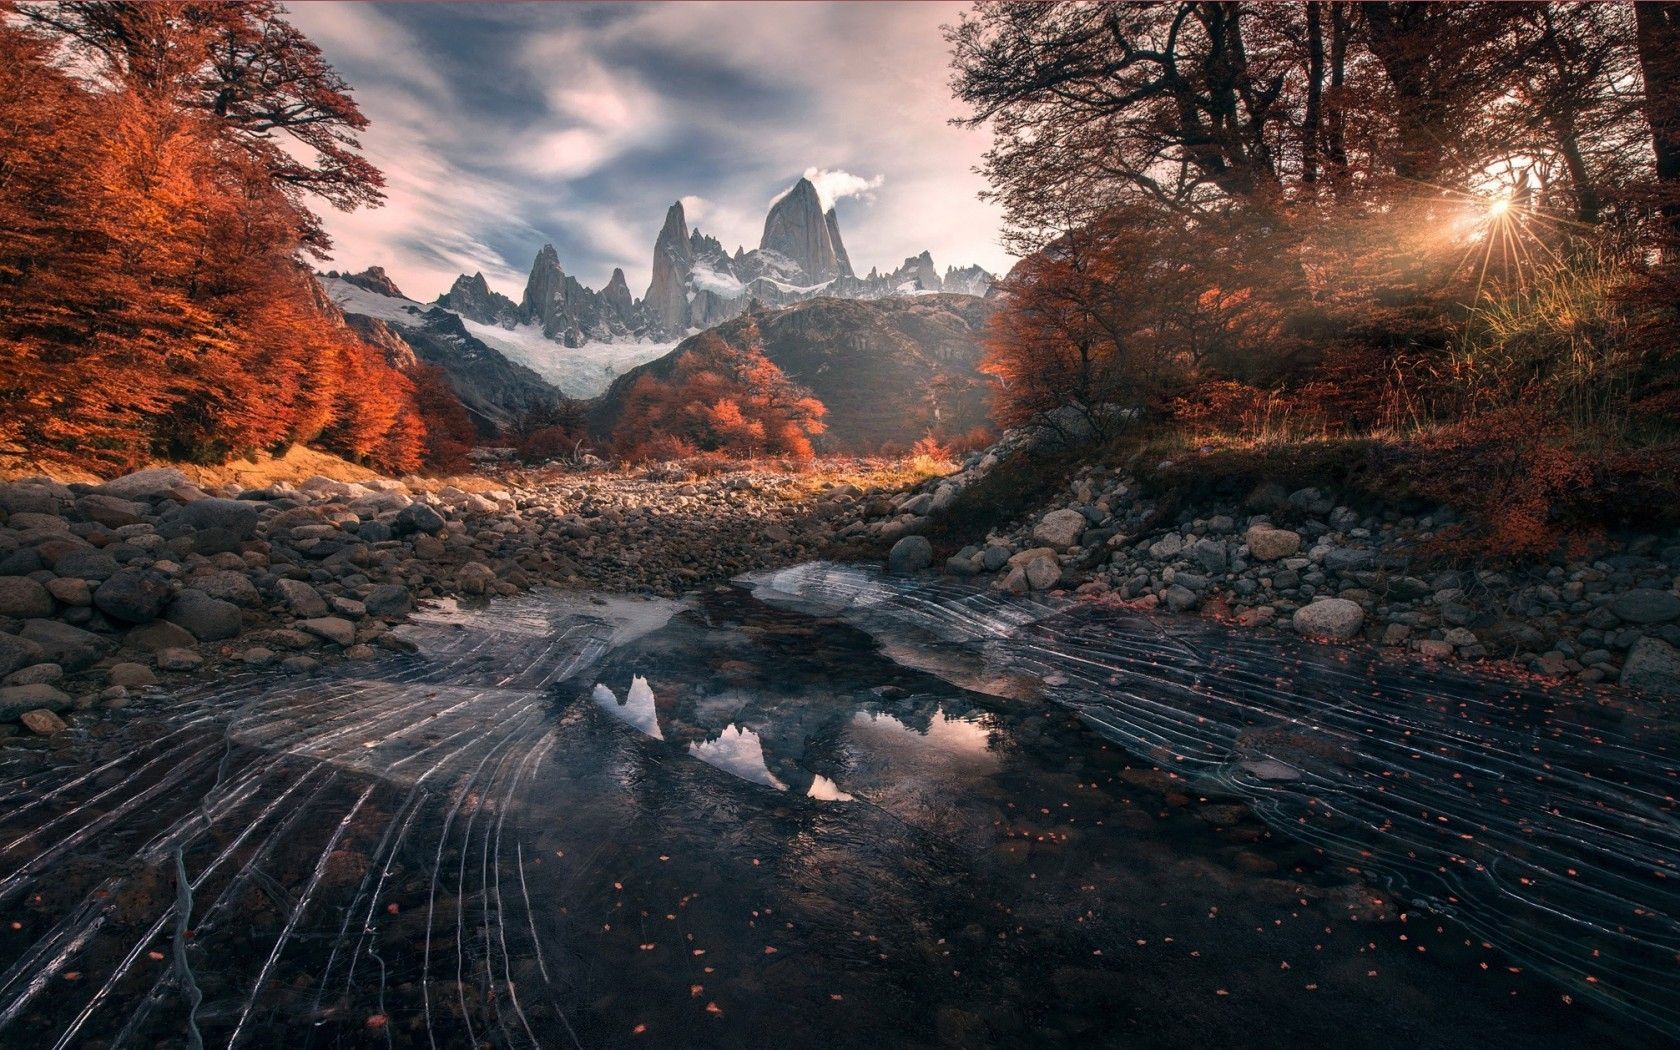 Download 1680x1050 Chile Patagonia, Autumn, Sun Rays, Trees, Stream Wallpaper for MacBook Pro 15 inch